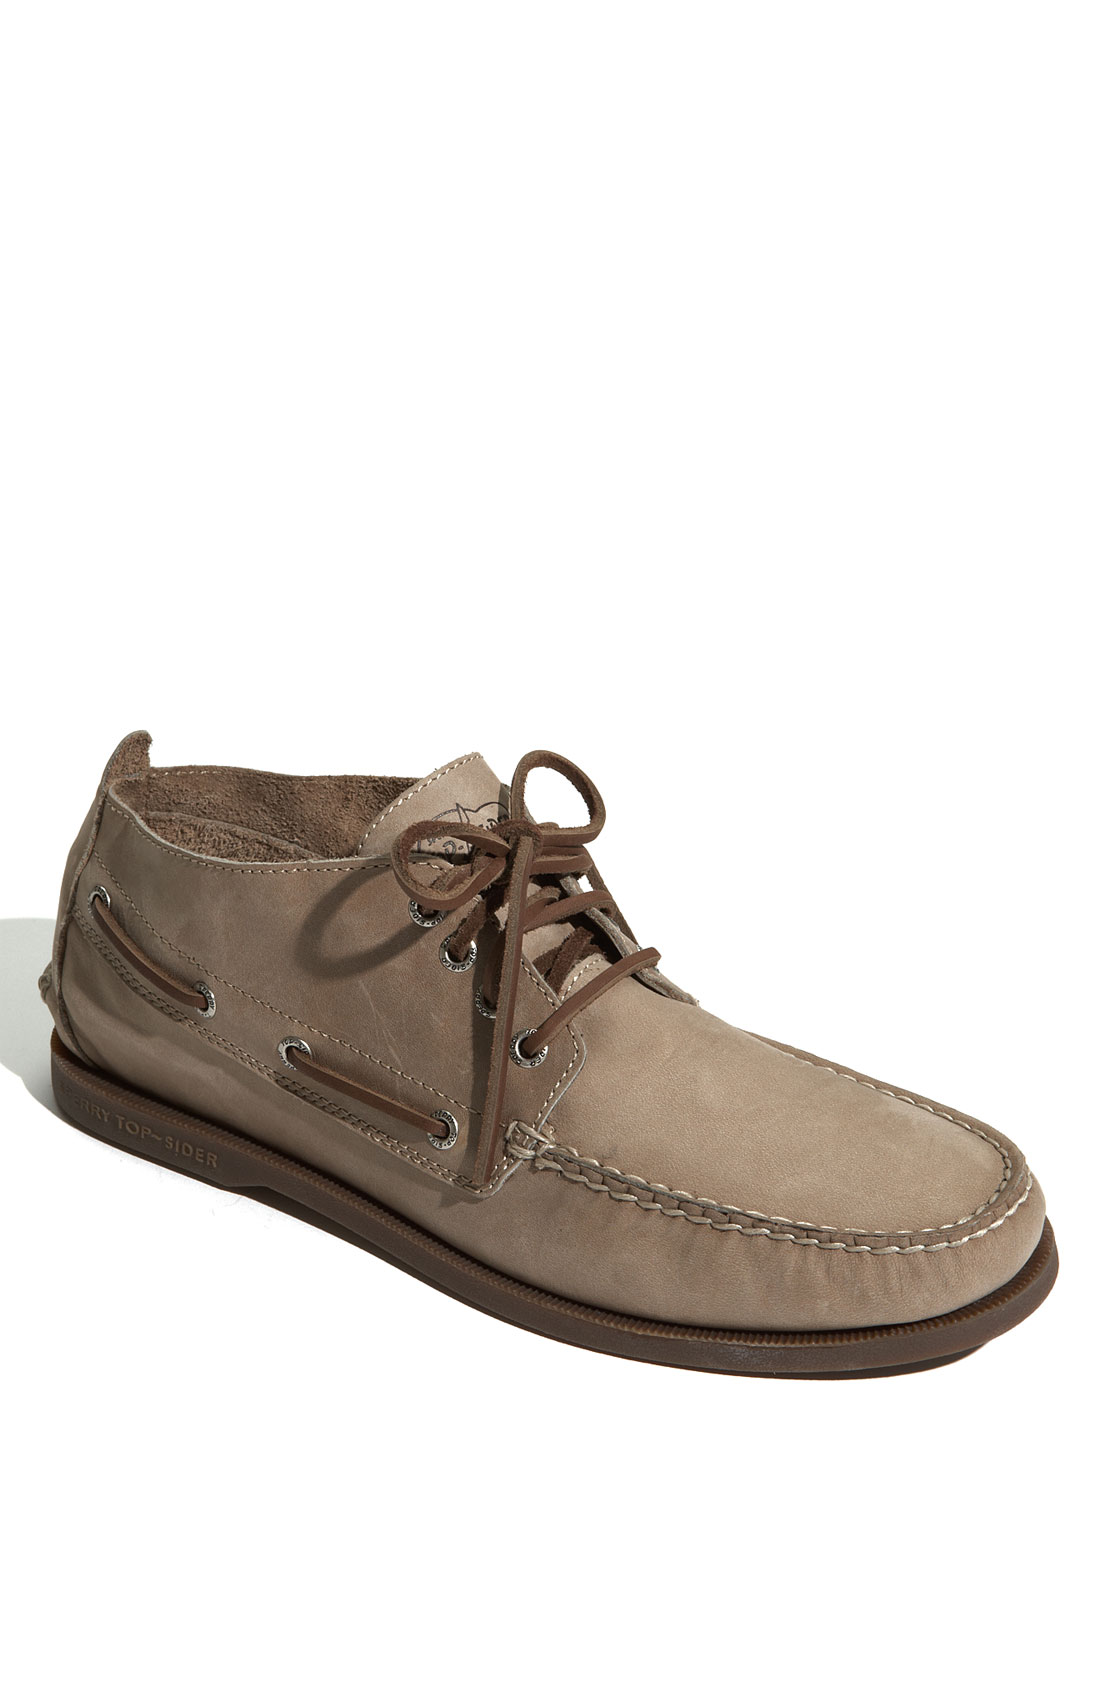 Sperry Top-sider Authentic Original Relaxed Chukka Boot in Beige for ...